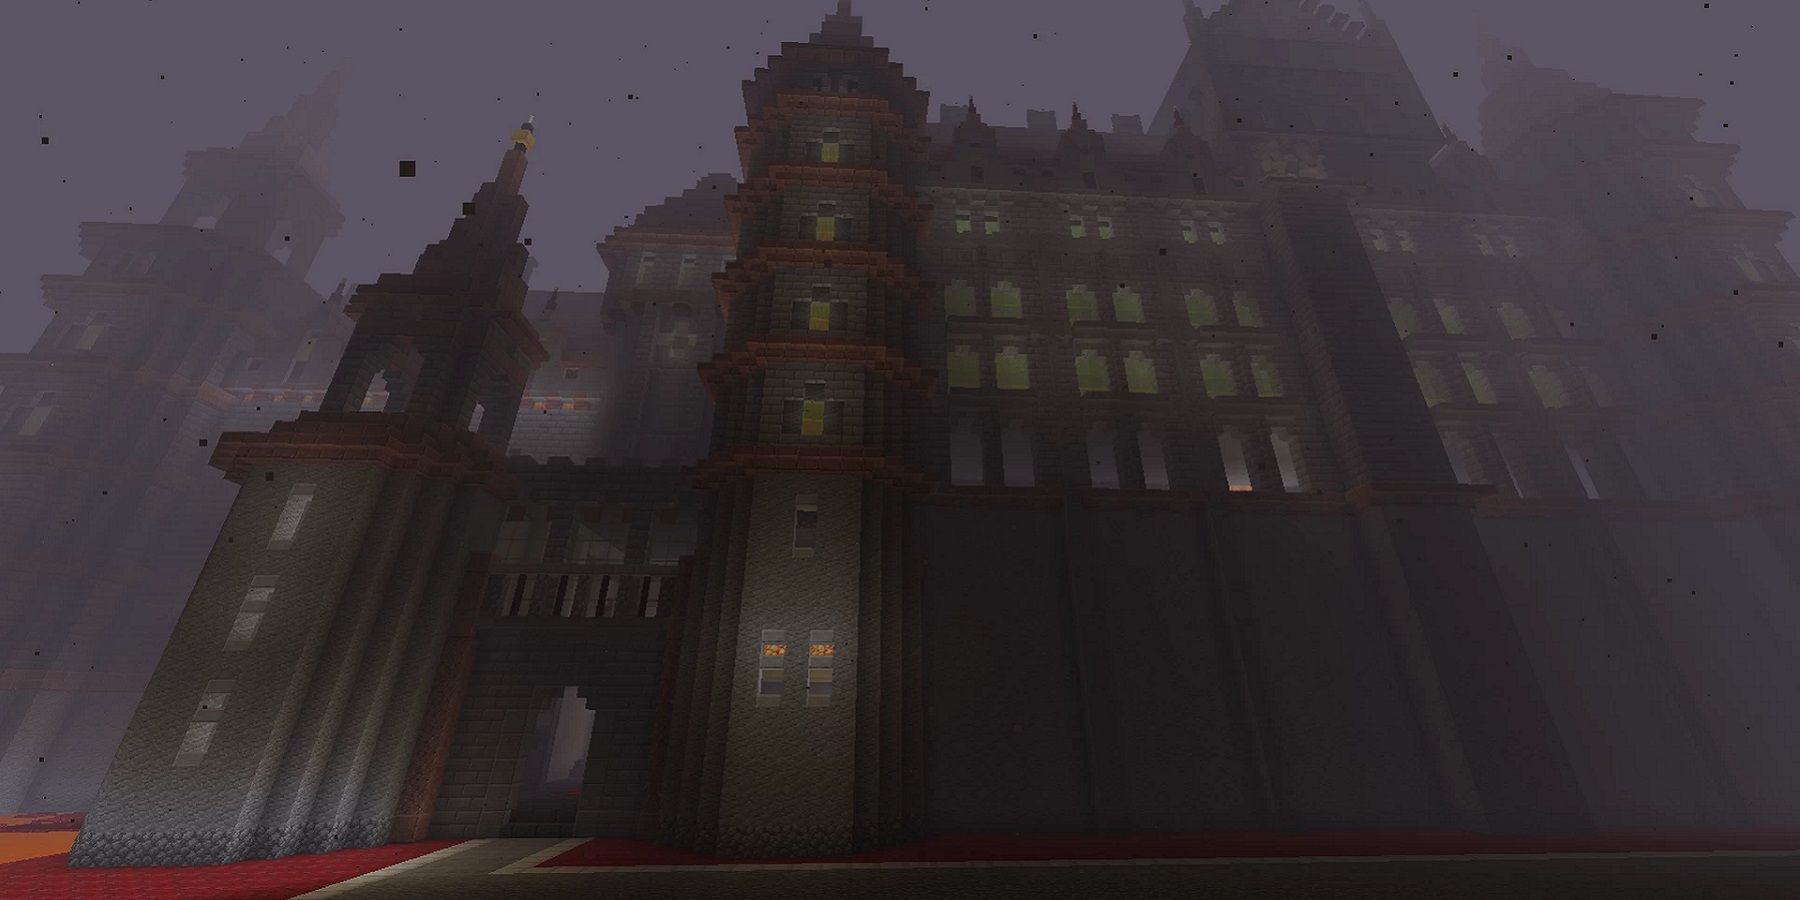 Image from Minecraft showing a gloomy Elden Ring-style castle.